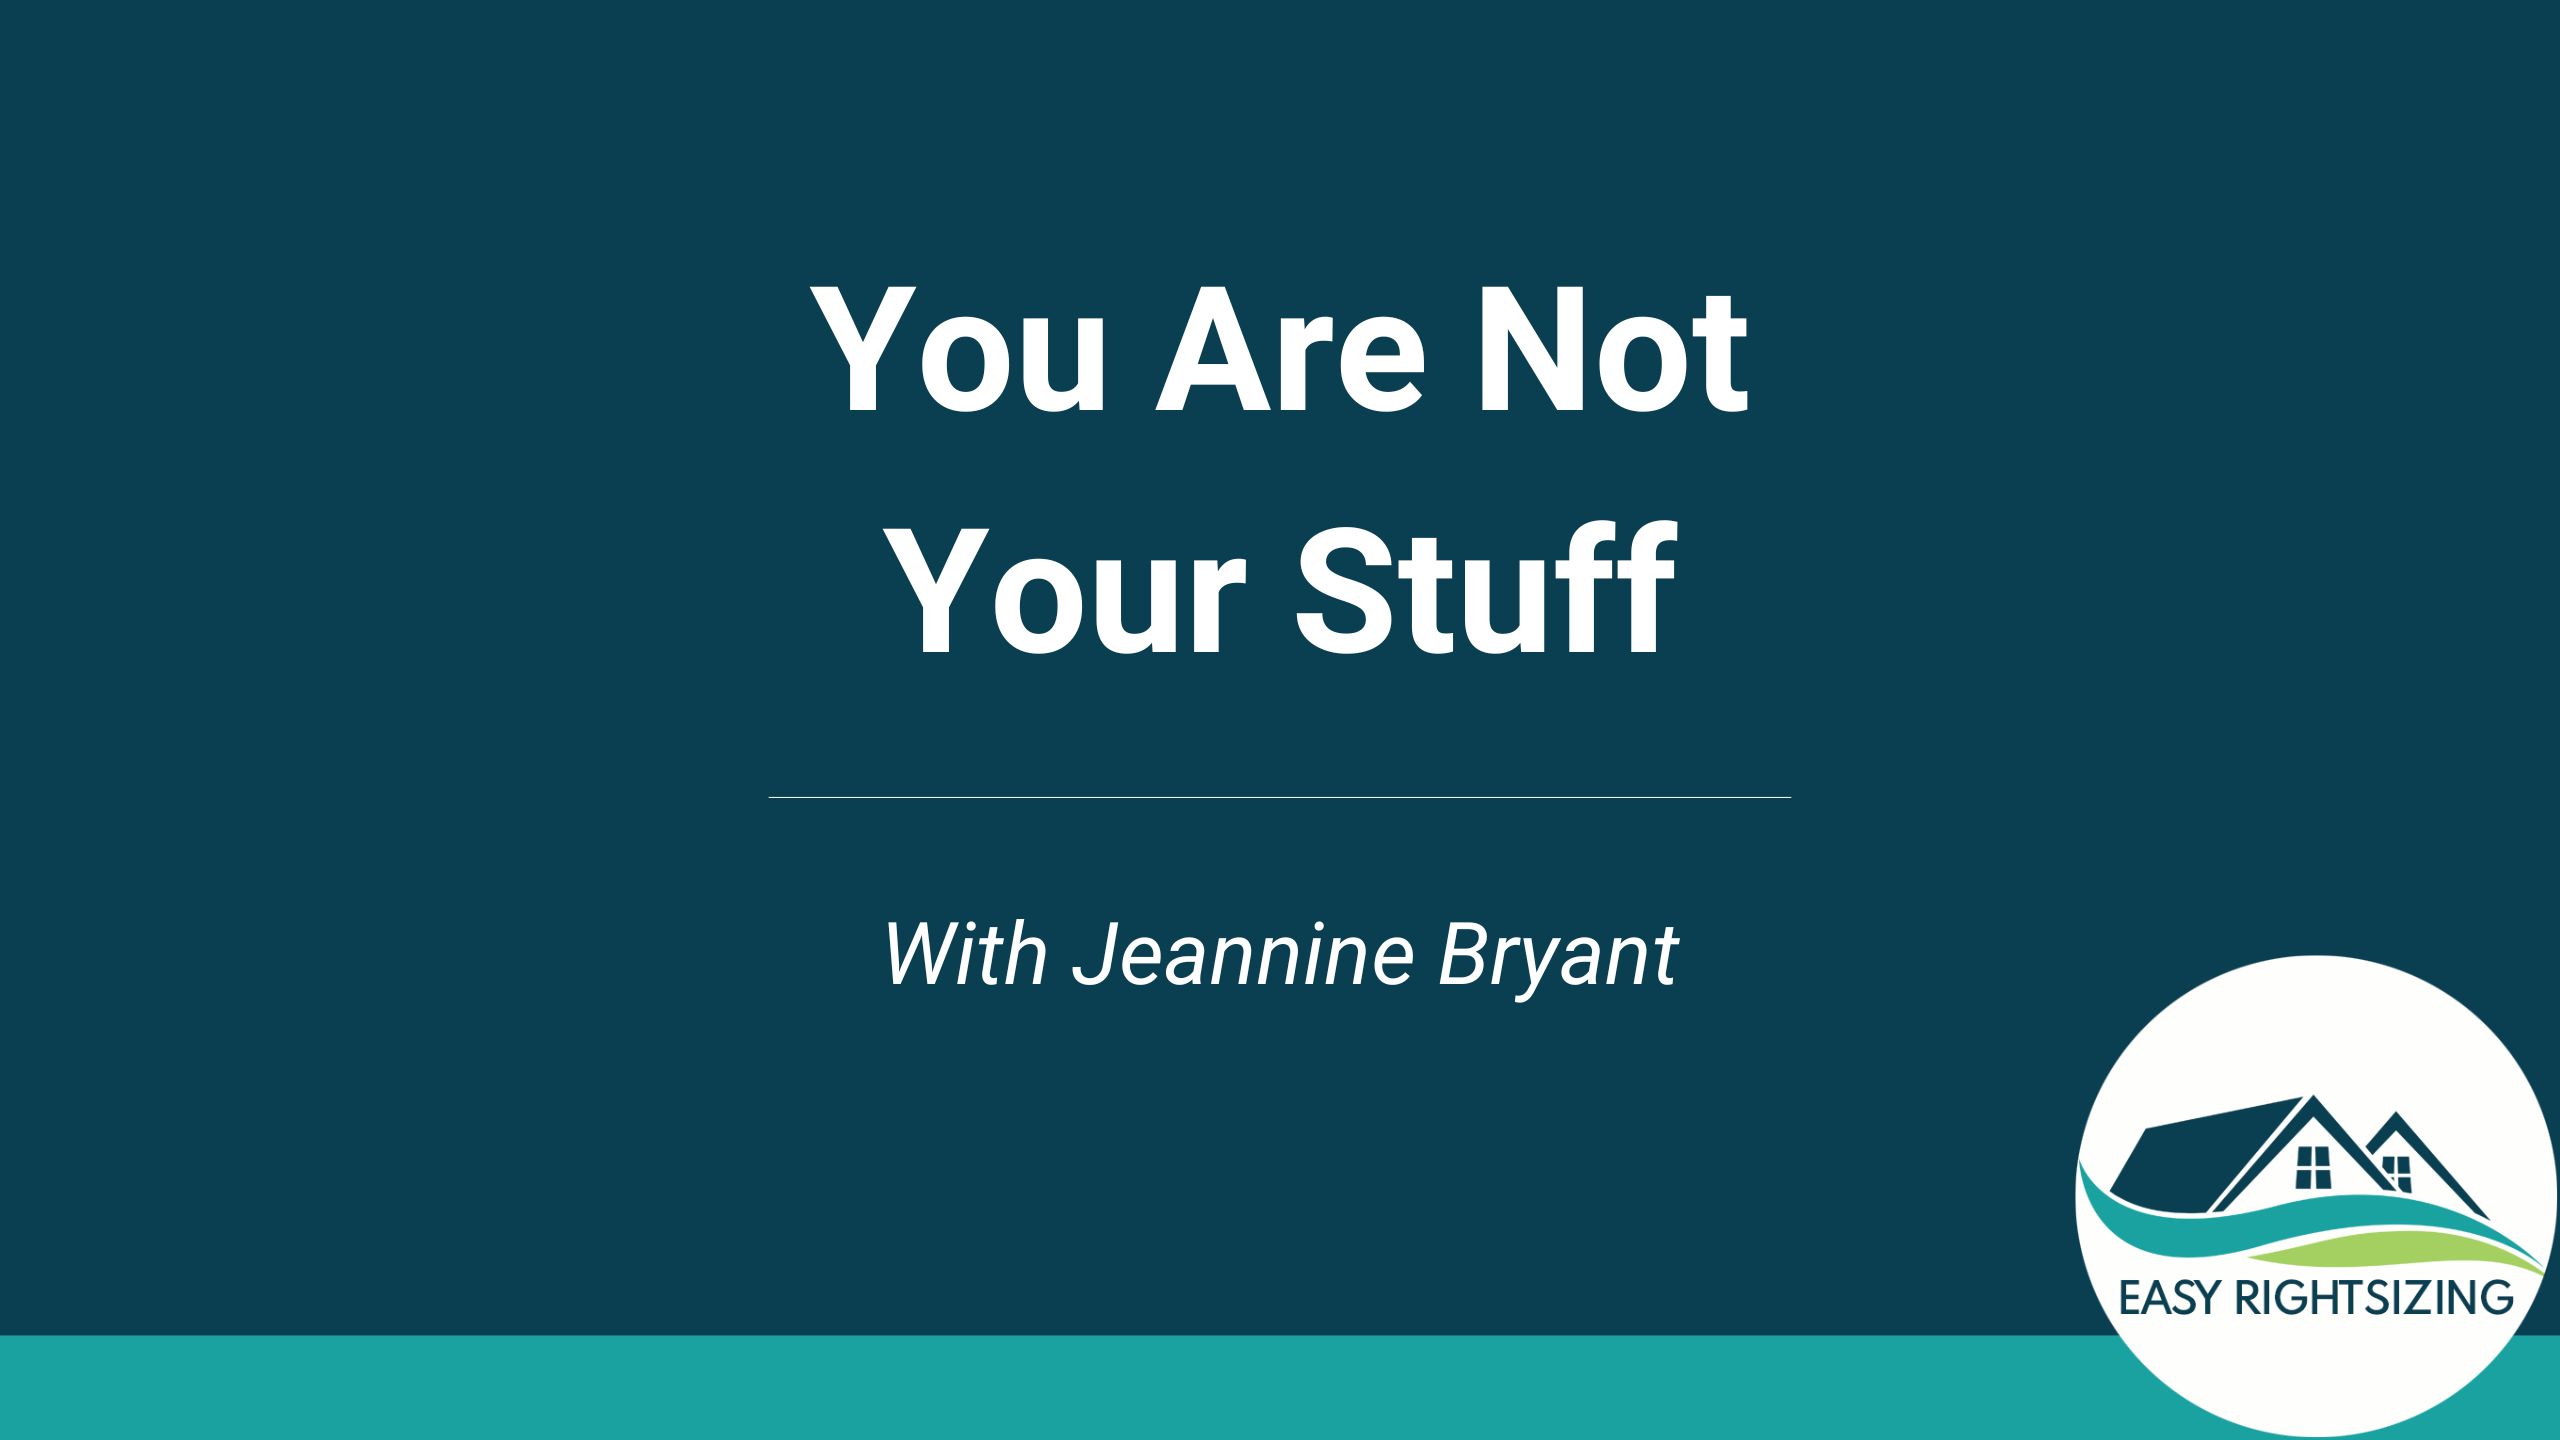 You Are Not Your Stuff